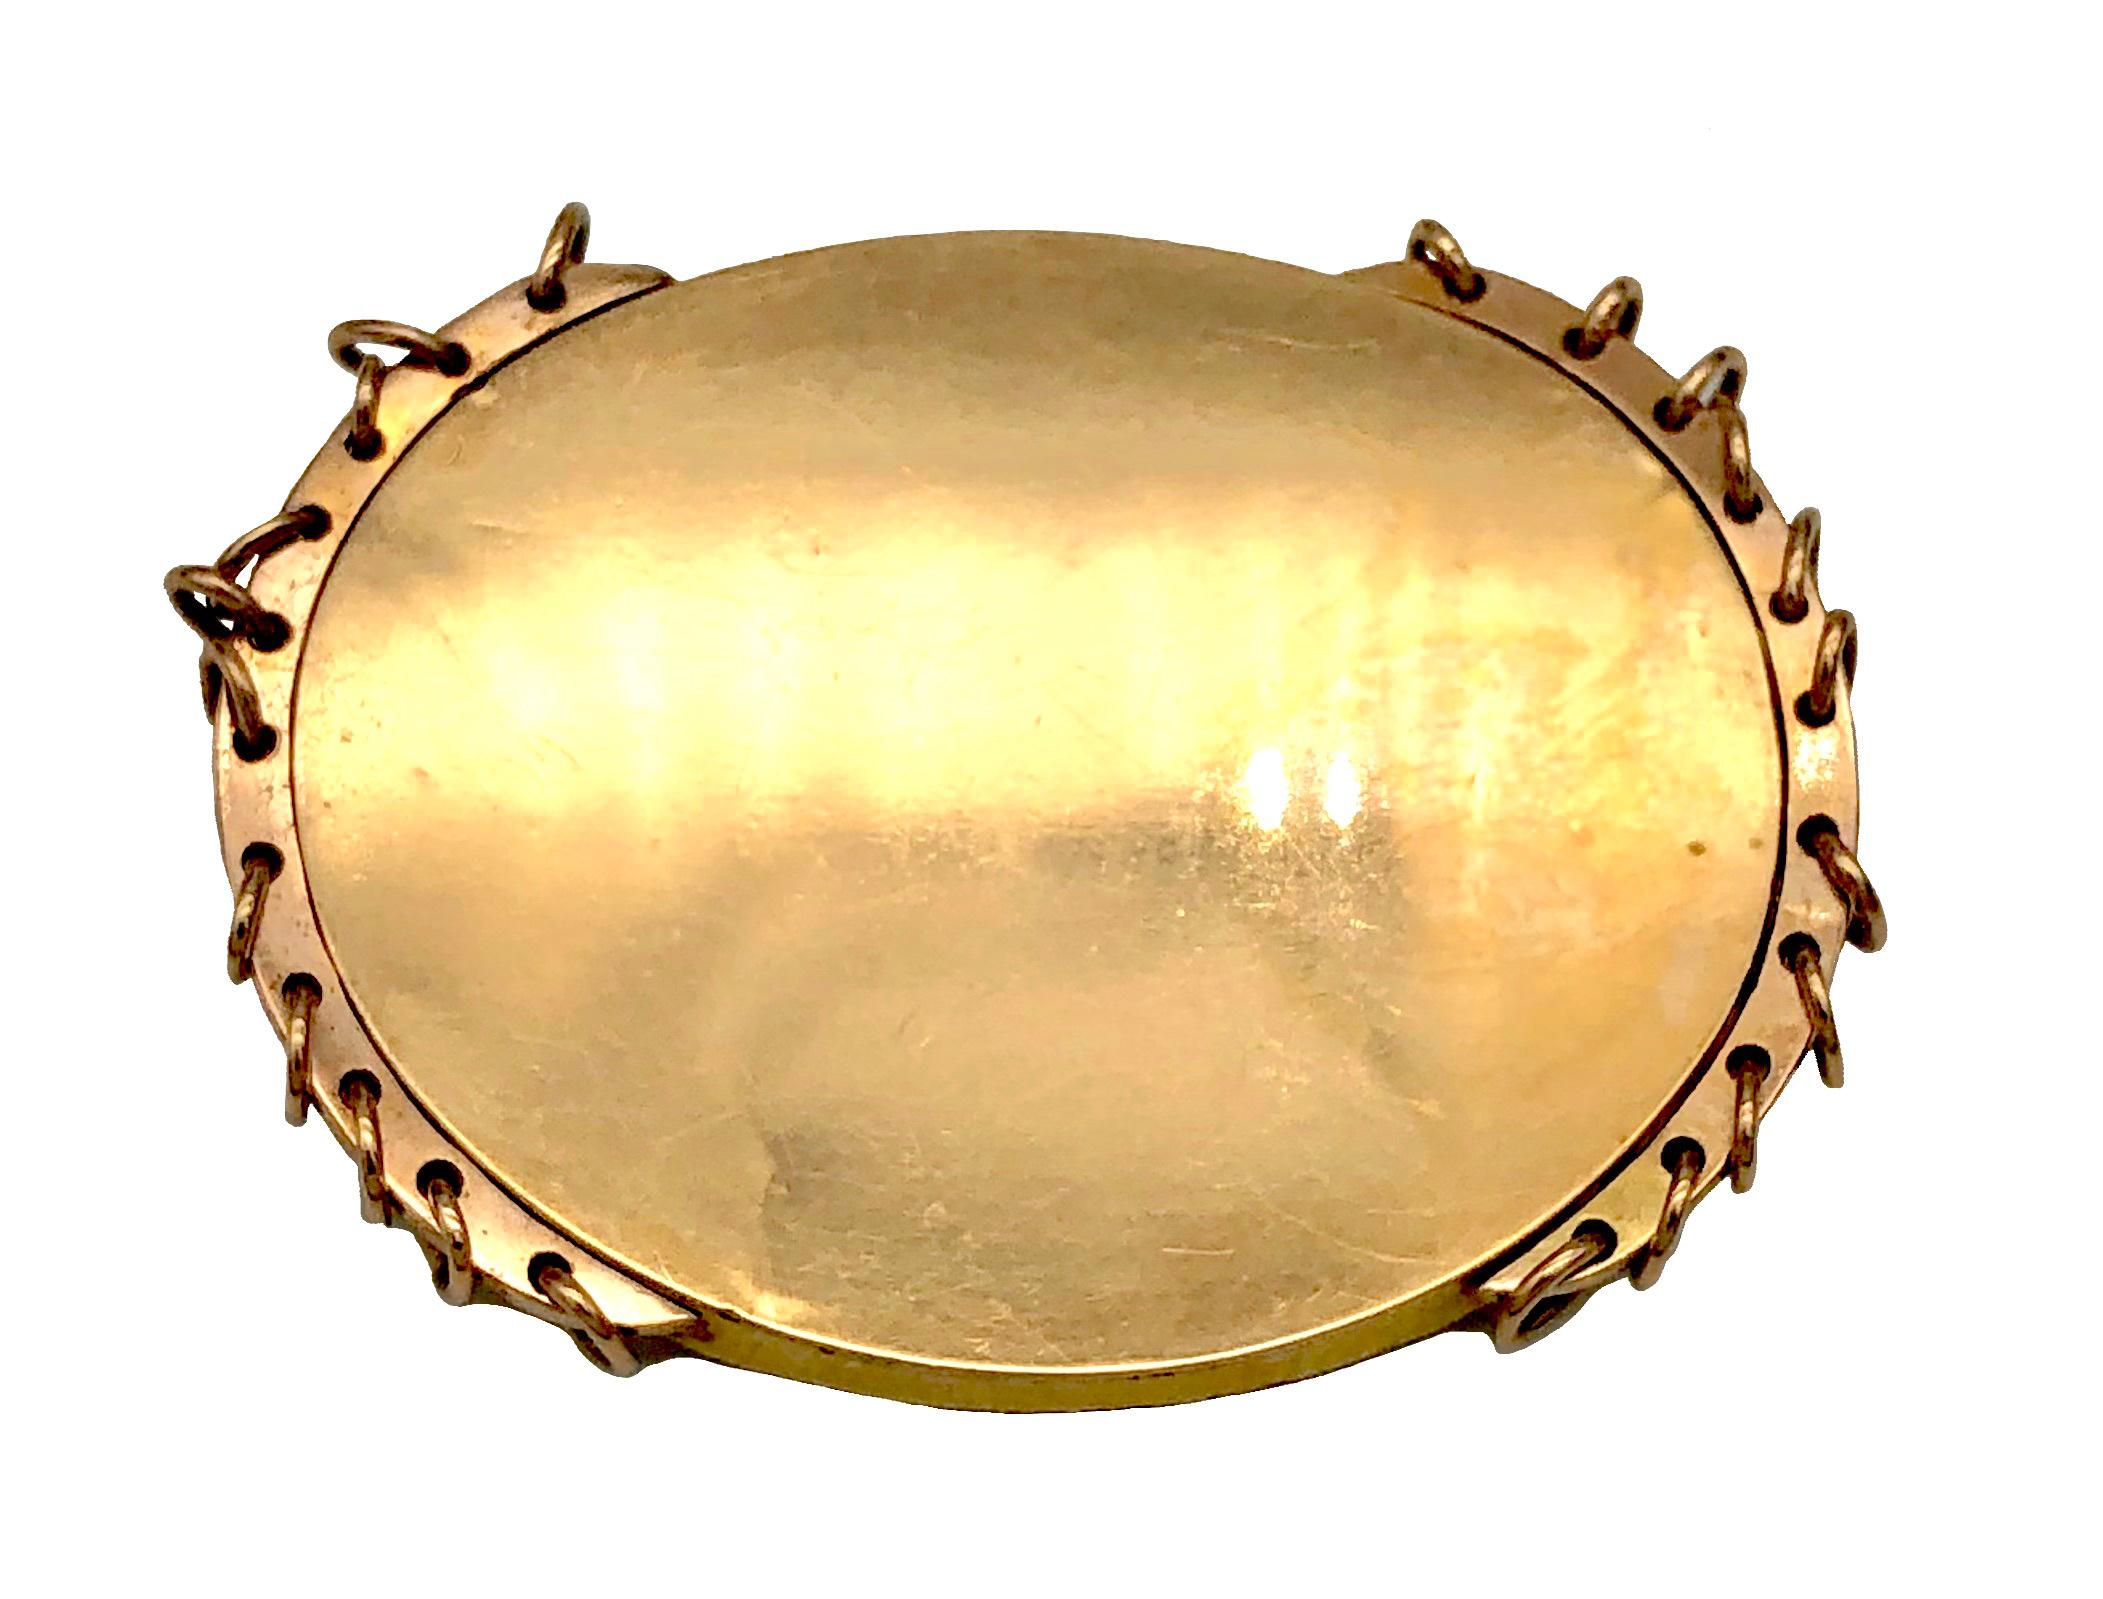 This unusual Georgian clasp is set with a landscape agate mounted in 9 karat gold. The clasp can be used for a bracelet or a necklace with up to 11 rows of small beads. 